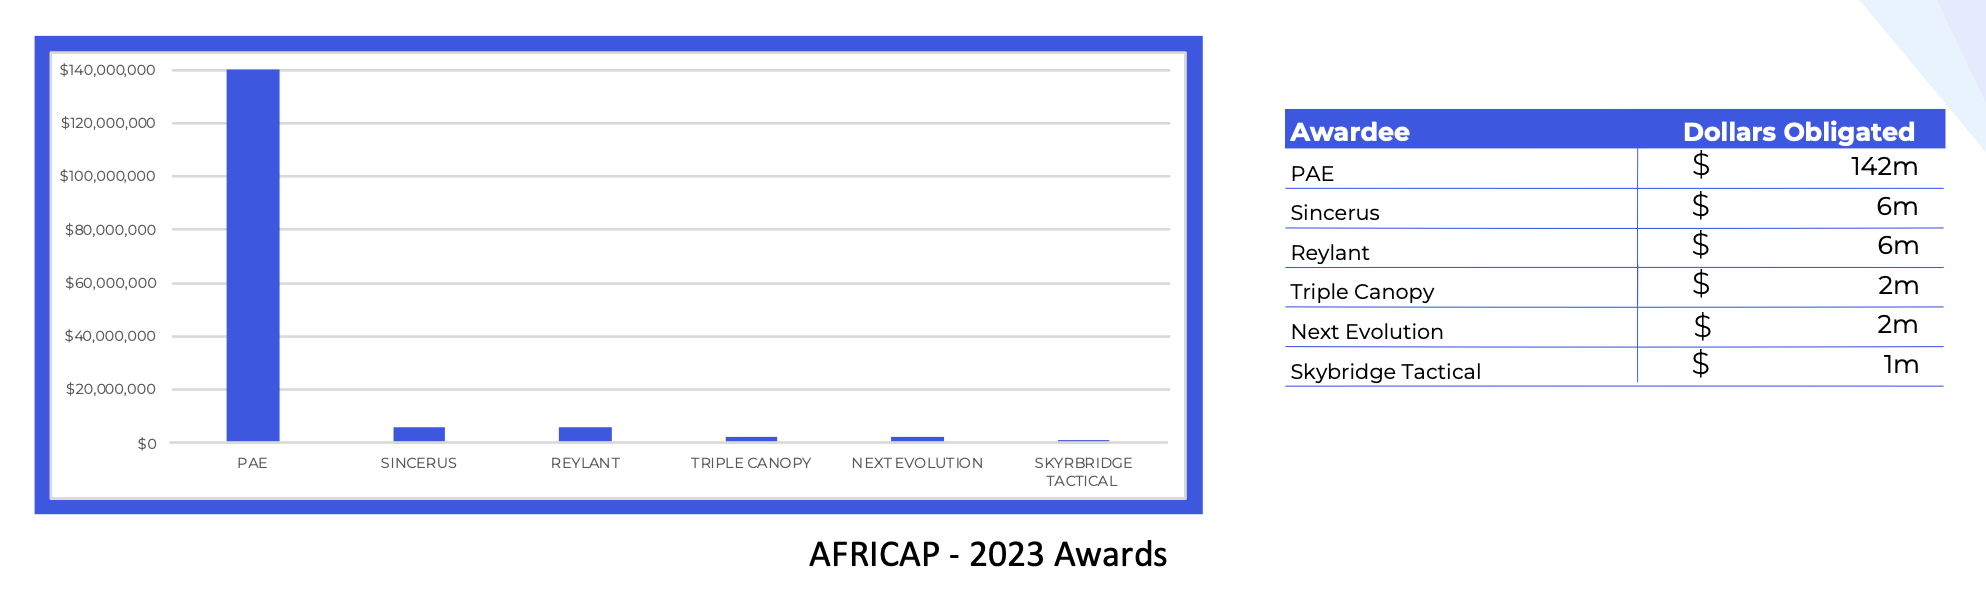 AFRICAP spending 2023 - bar graph and table